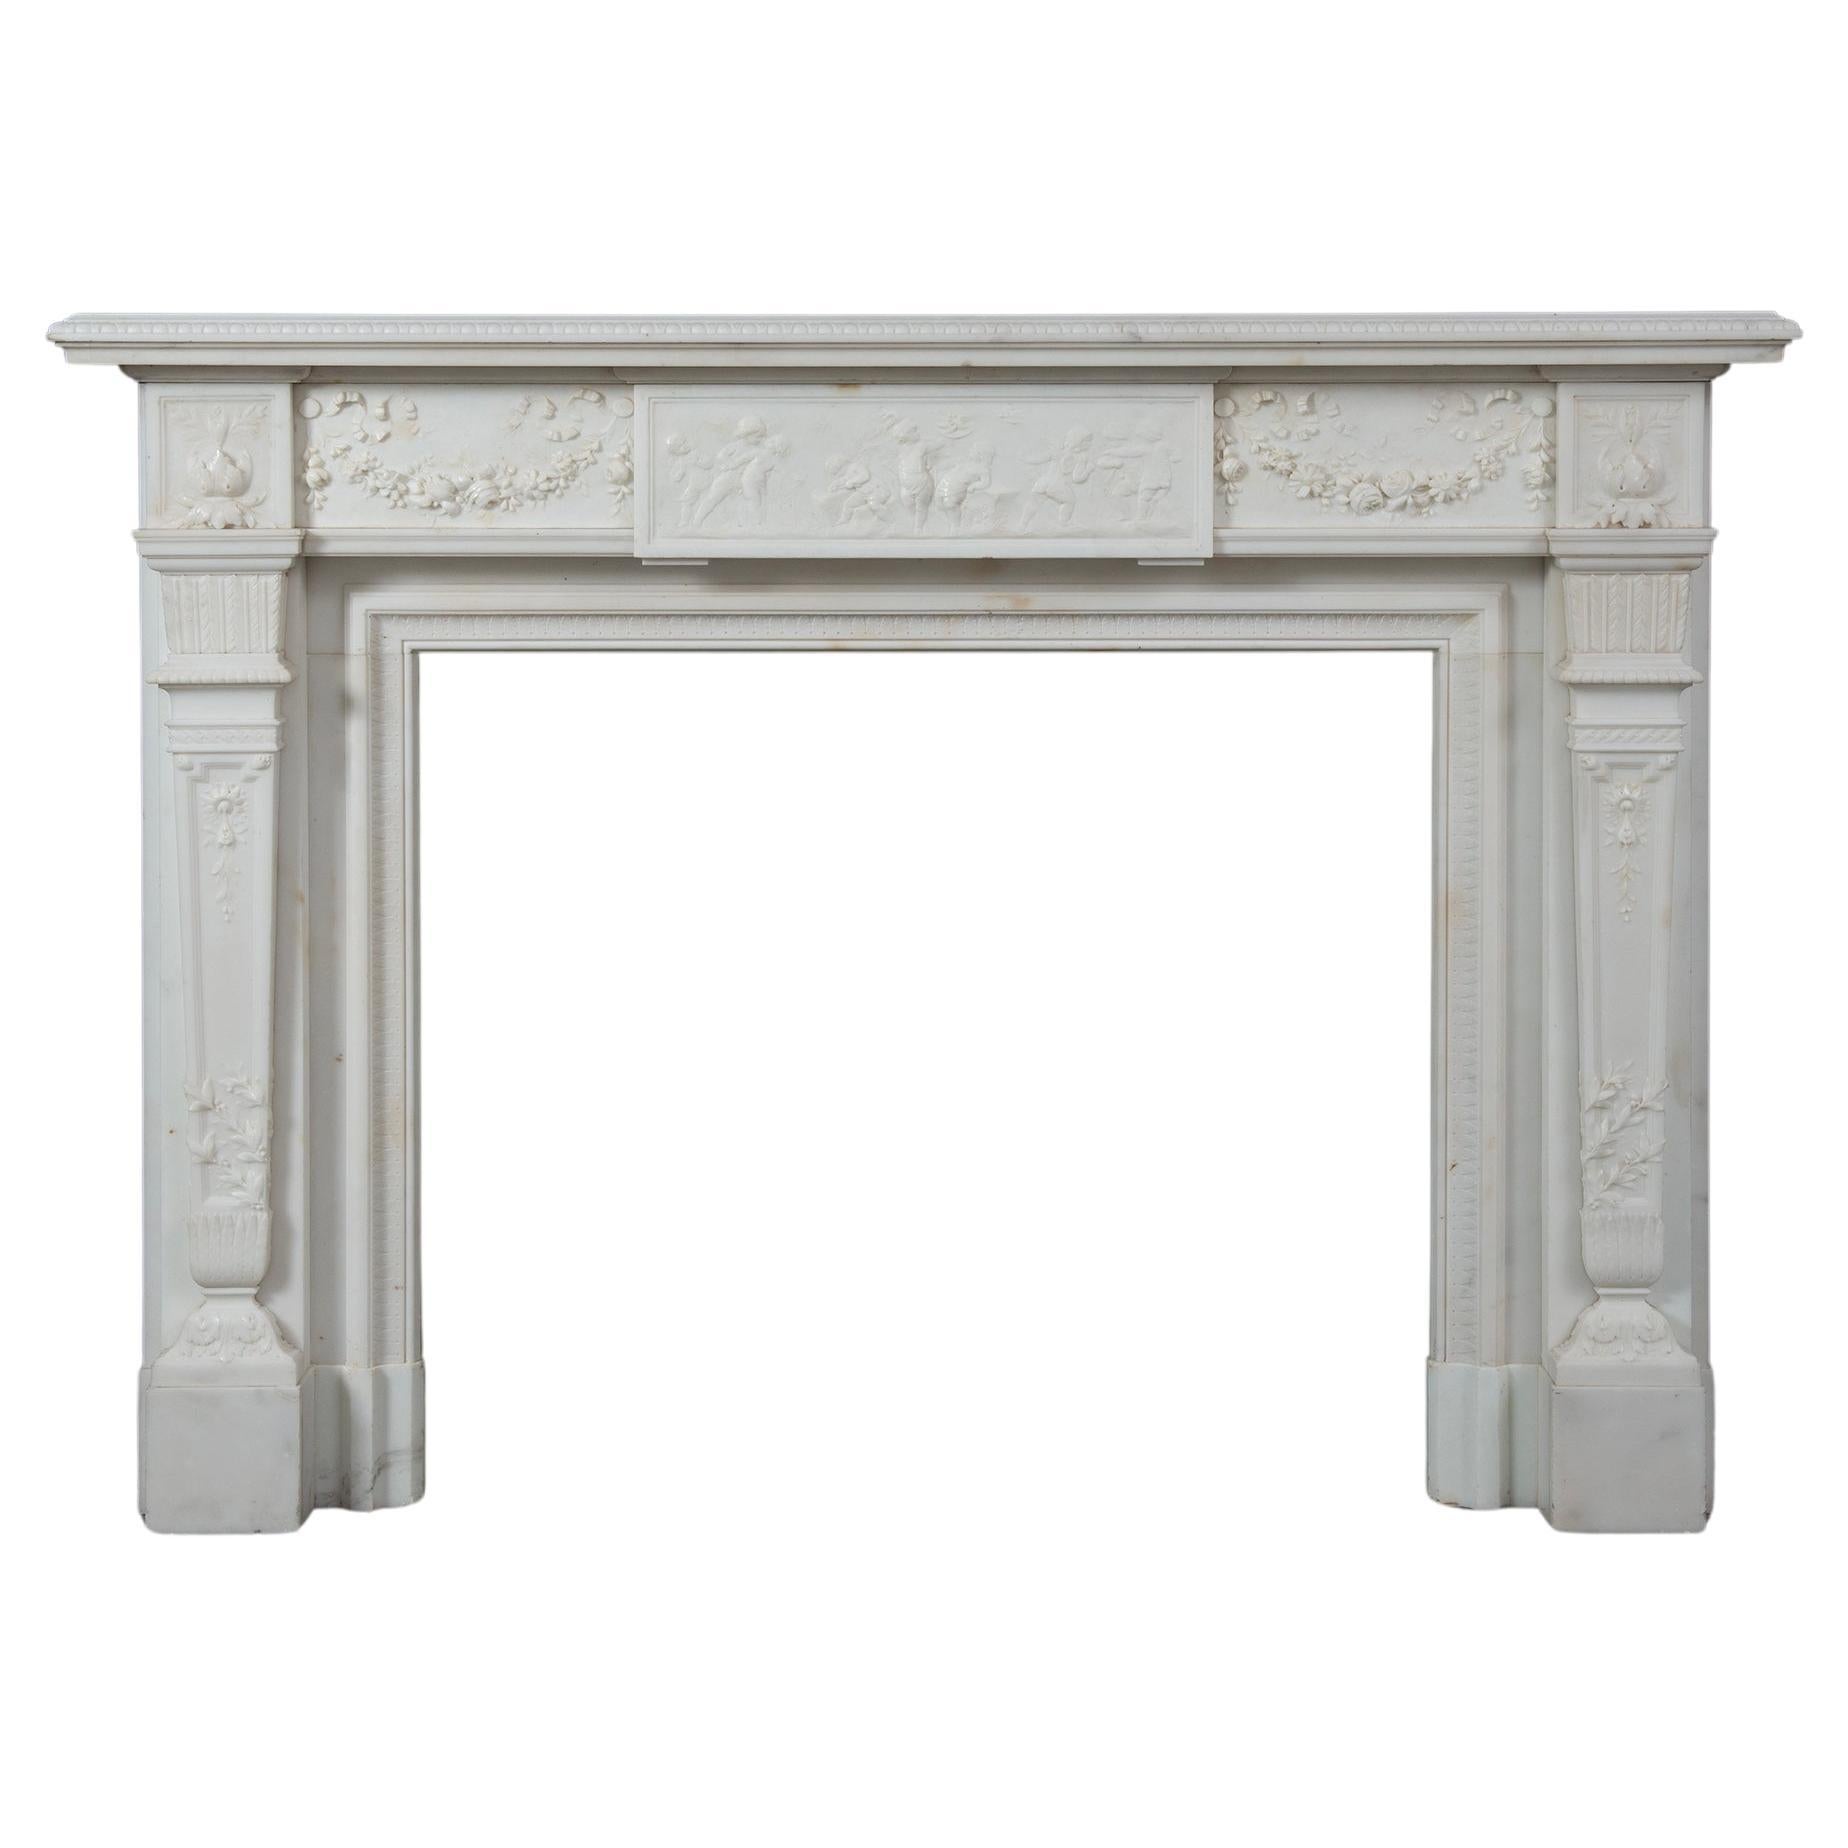 Neoclassical Statuary Marble Mantelpiece For Sale